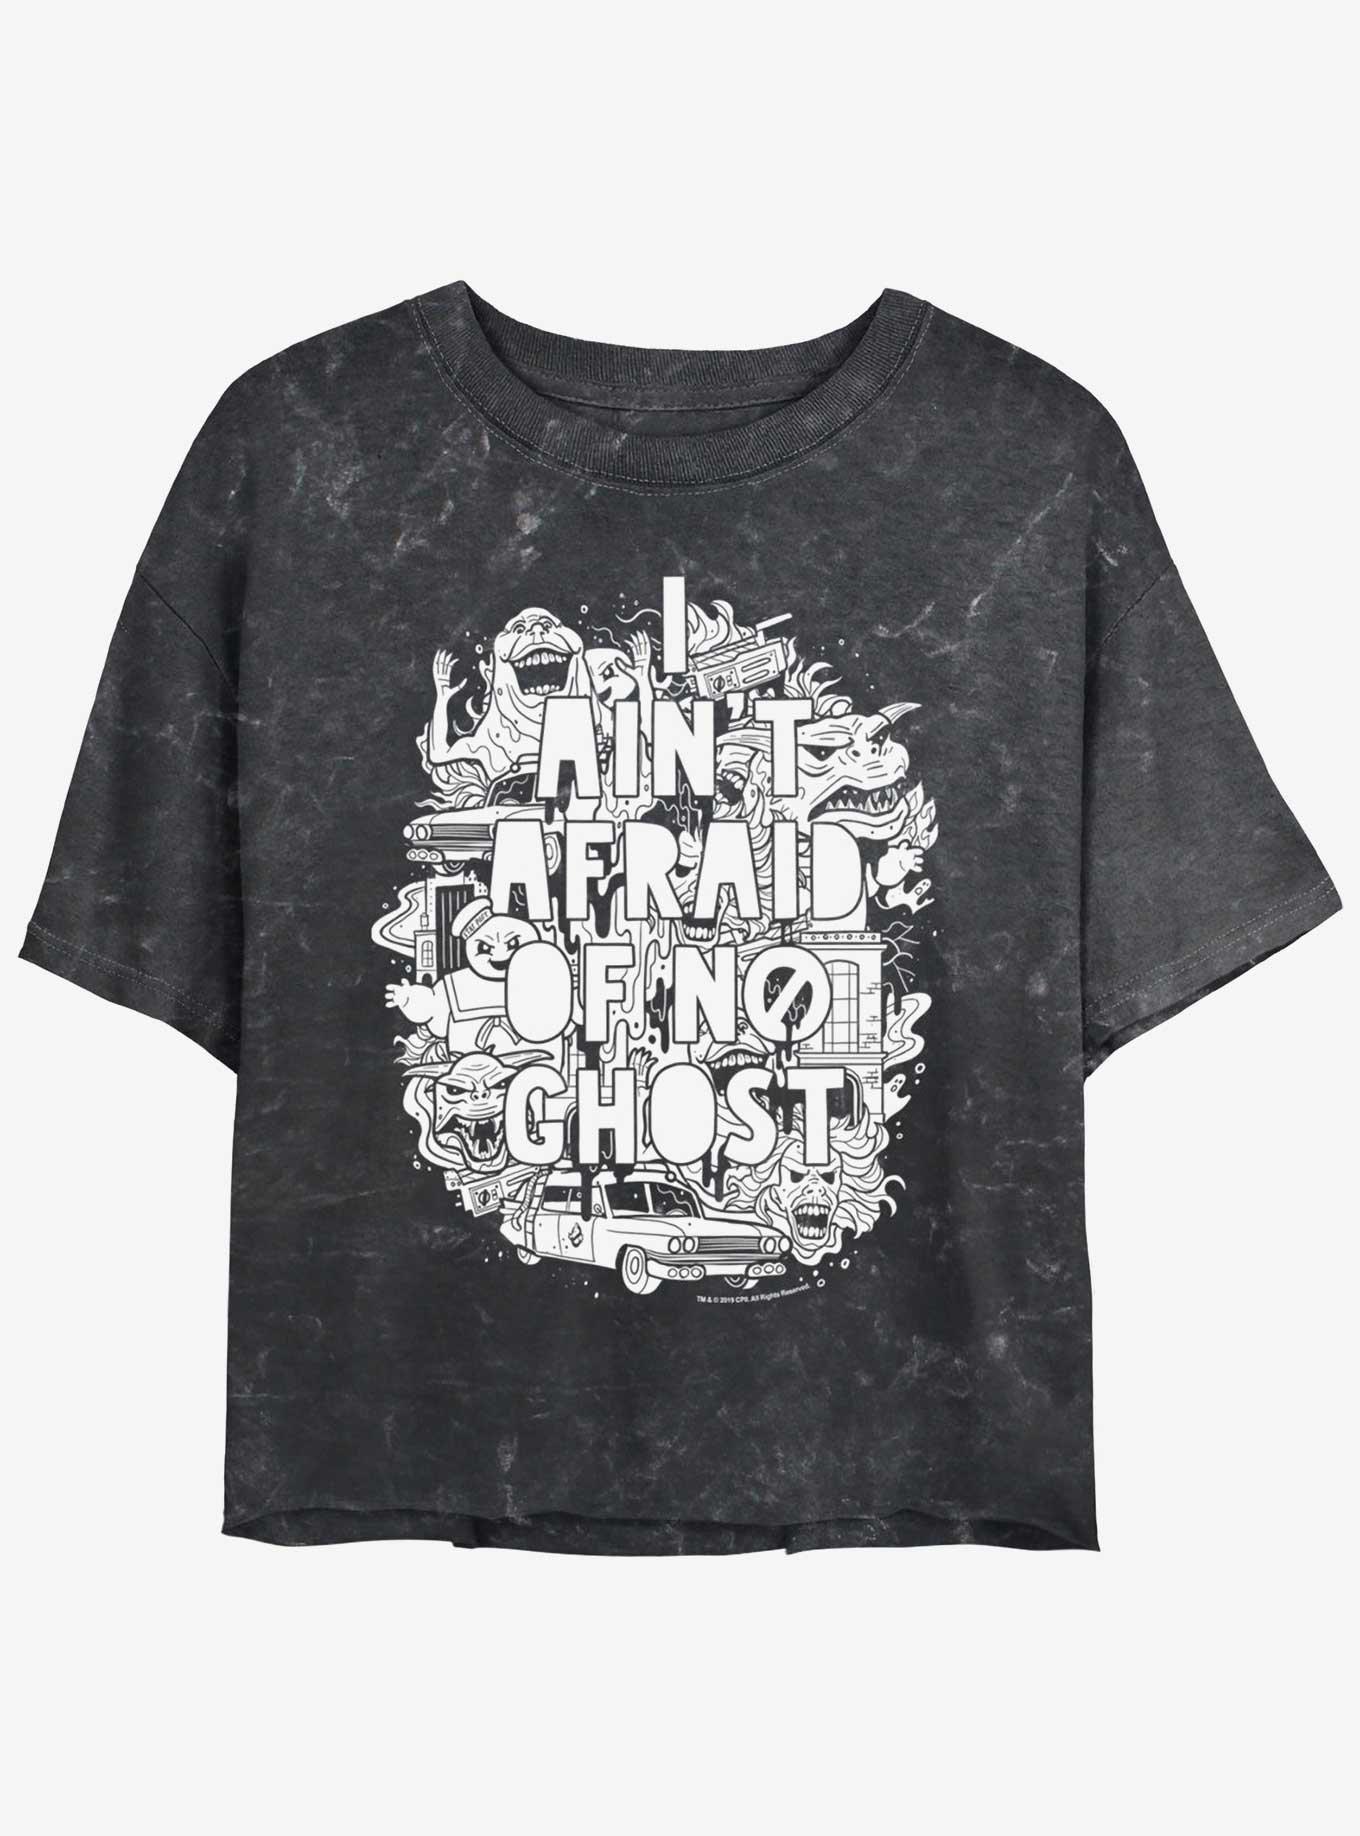 Ghostbusters Ain't Afraid Of No Ghost Girls Mineral Wash Crop T-Shirt, BLACK, hi-res